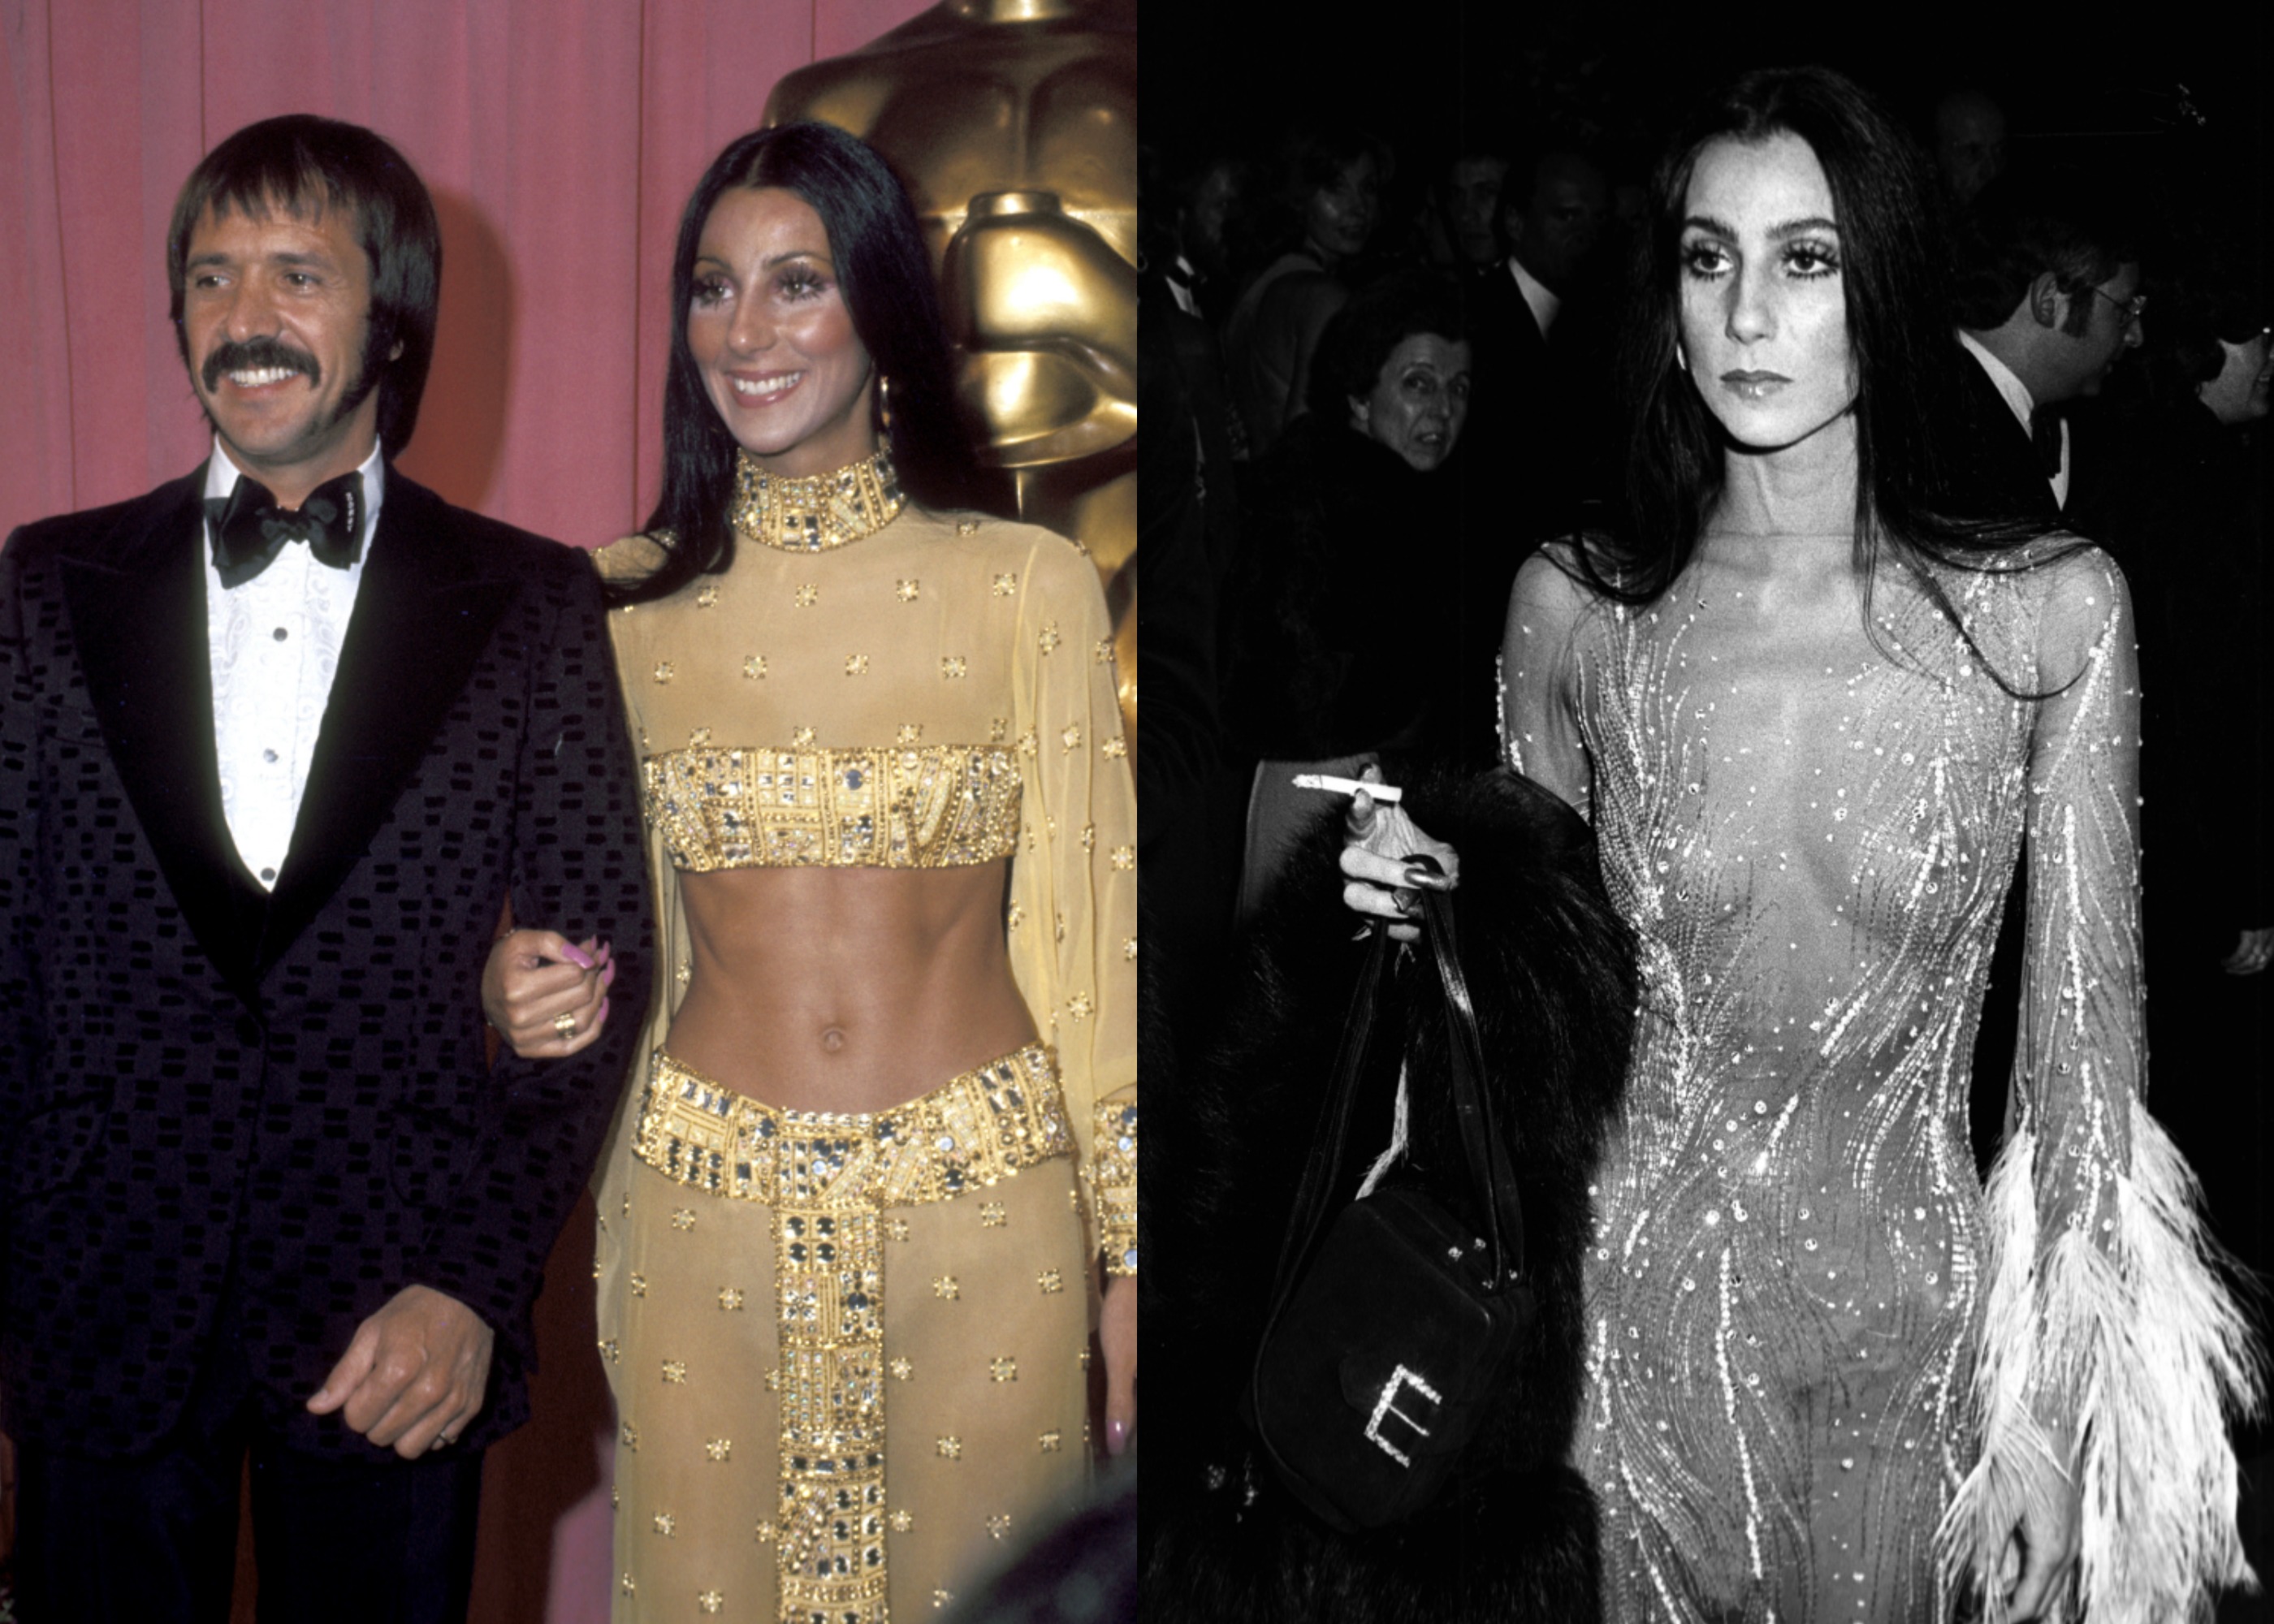 Cher's Most Iconic Outfits